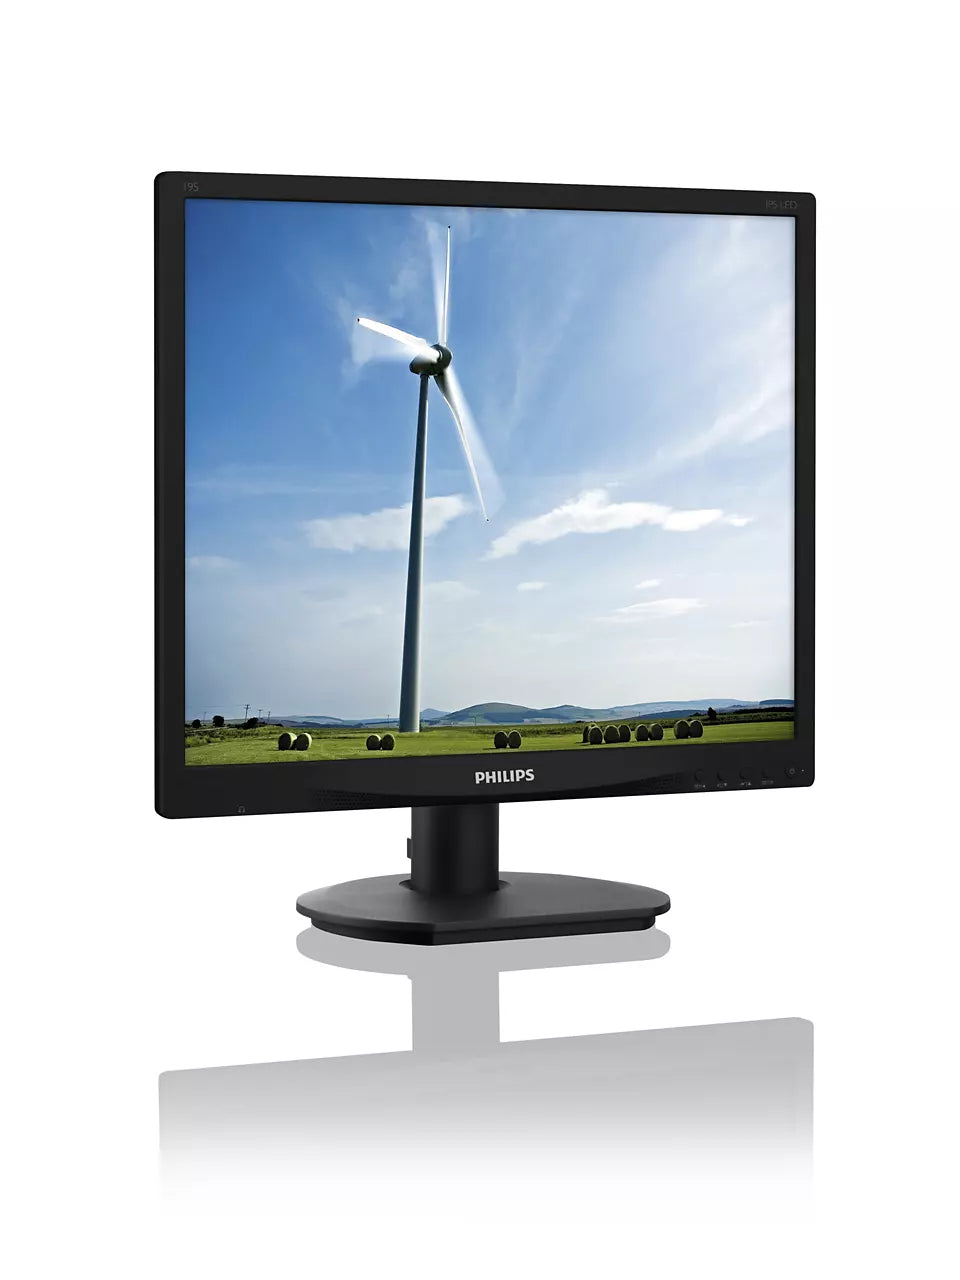 Philips 19S4QAB/75 19" S Line 1280x1024 LCD monitor with SmartImage